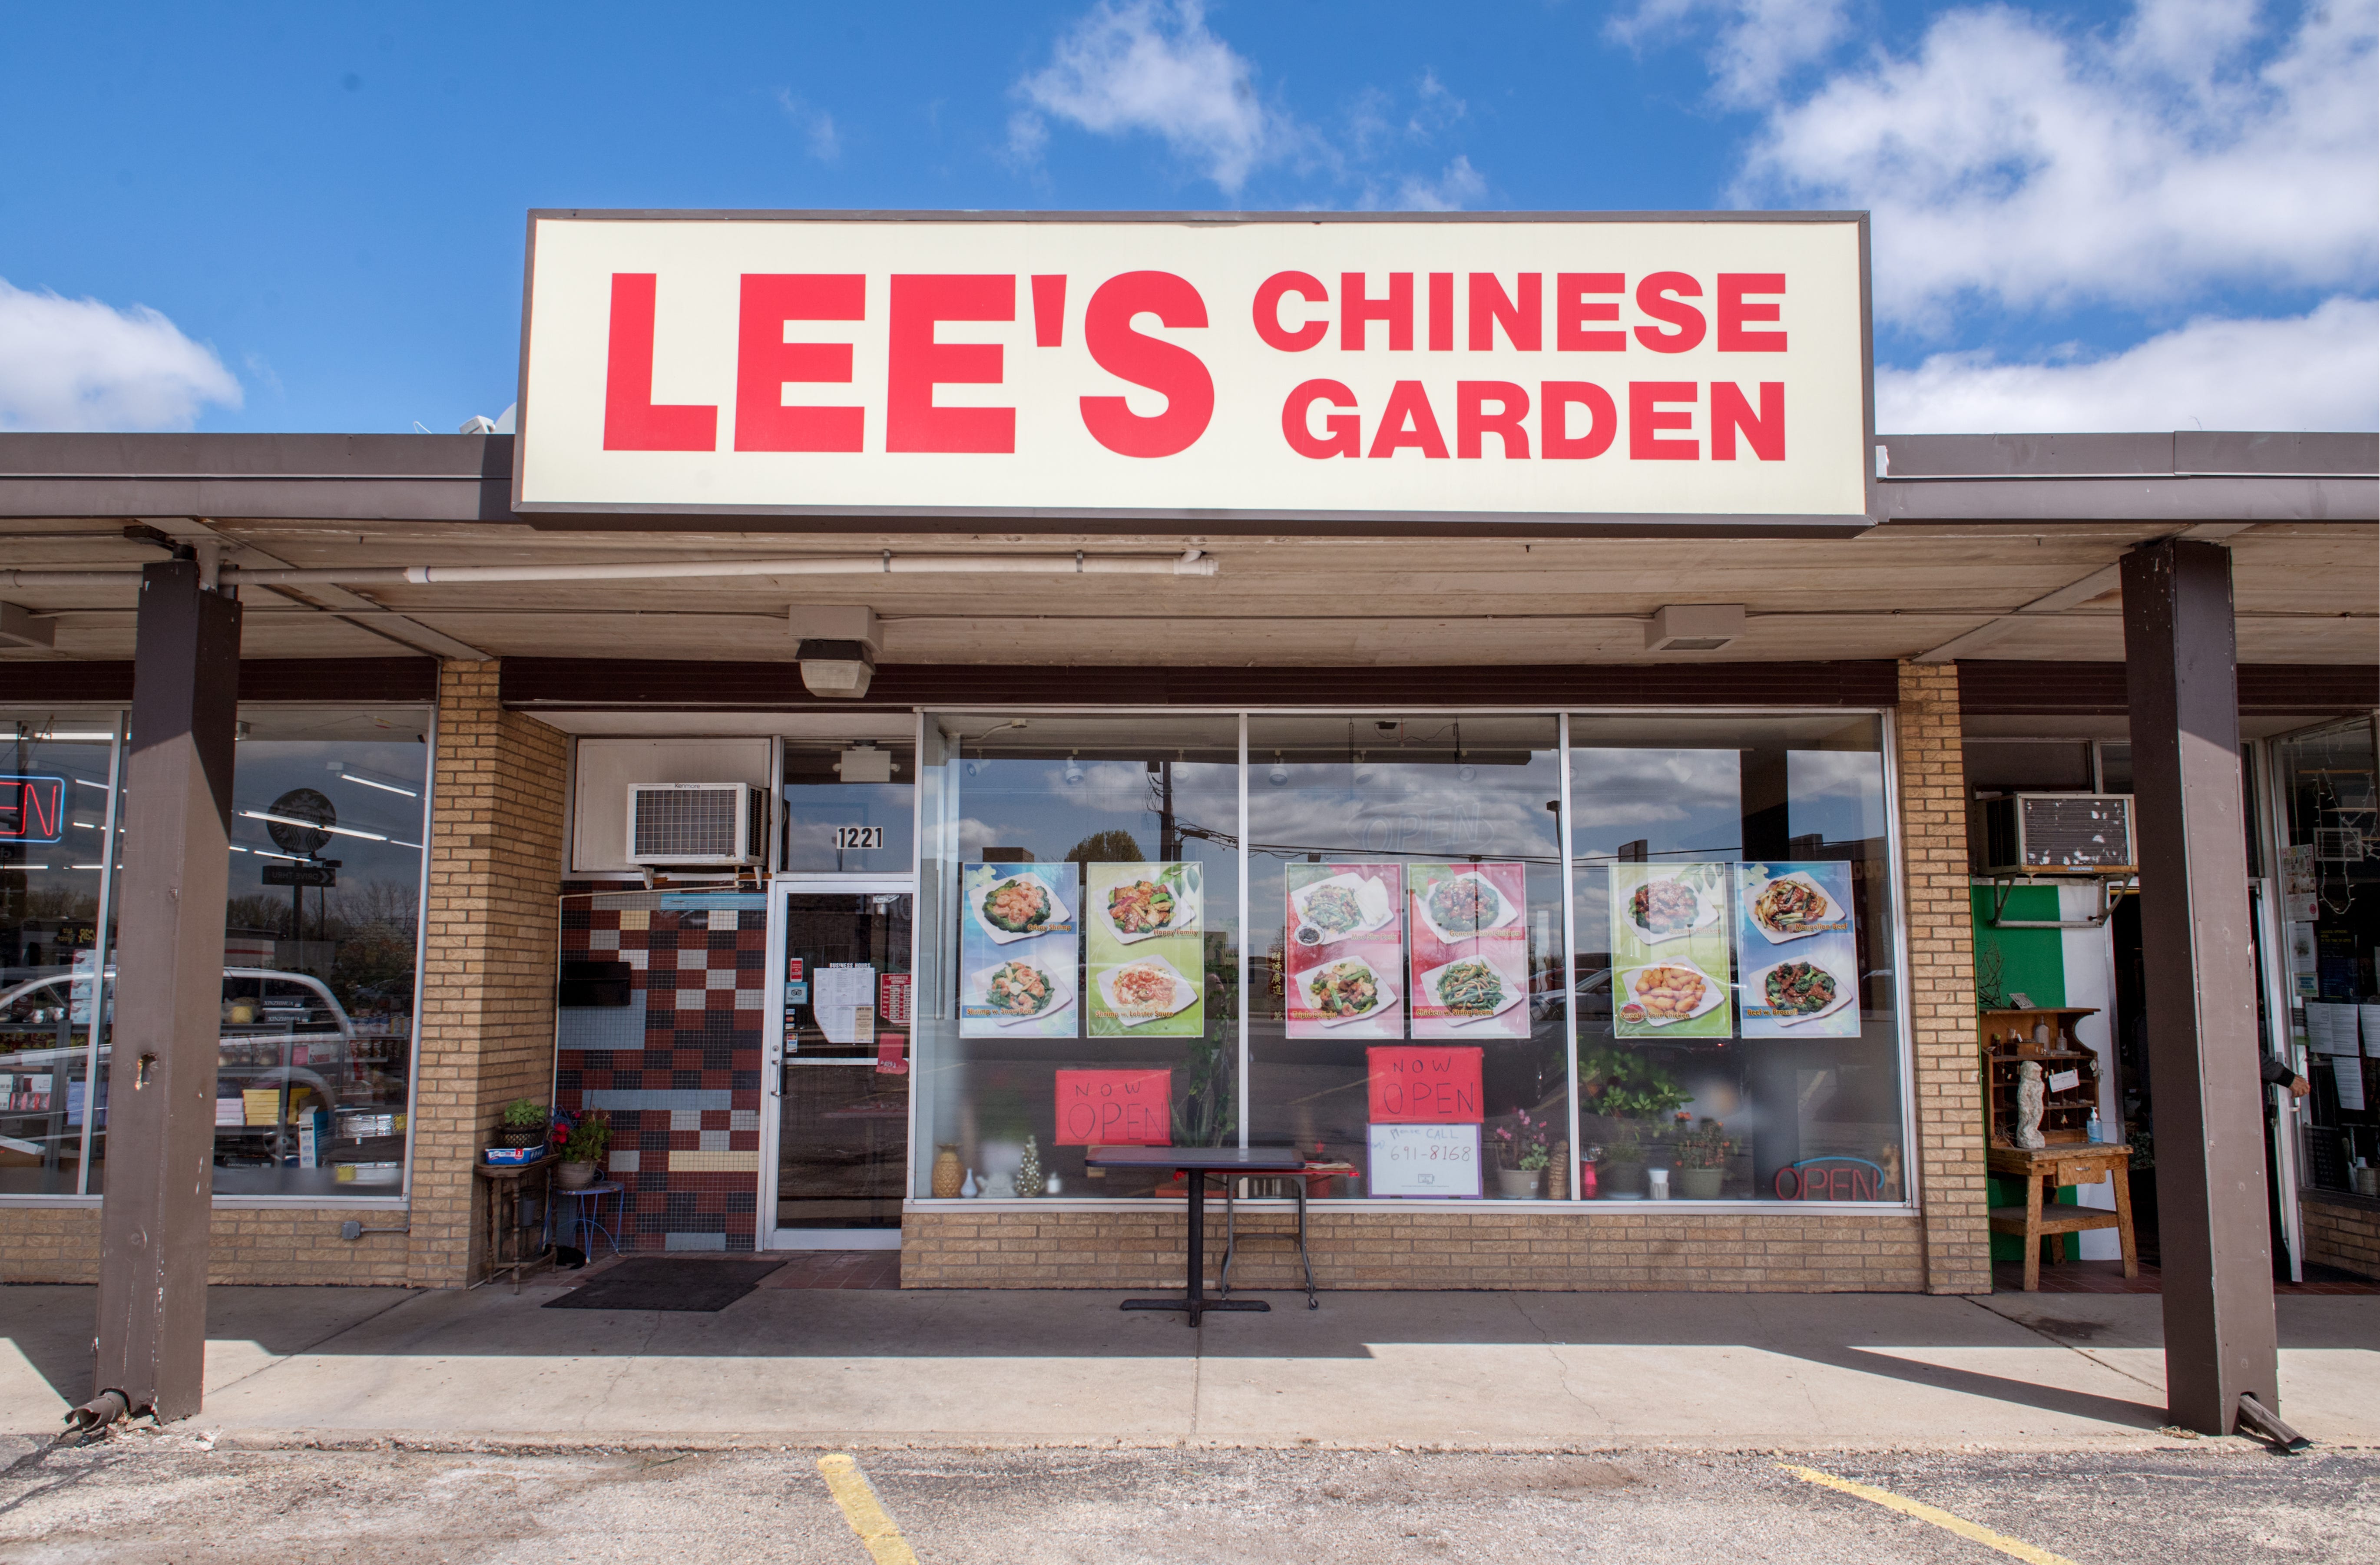 New Peoria car wash to permanently close Lee's Chinese Garden